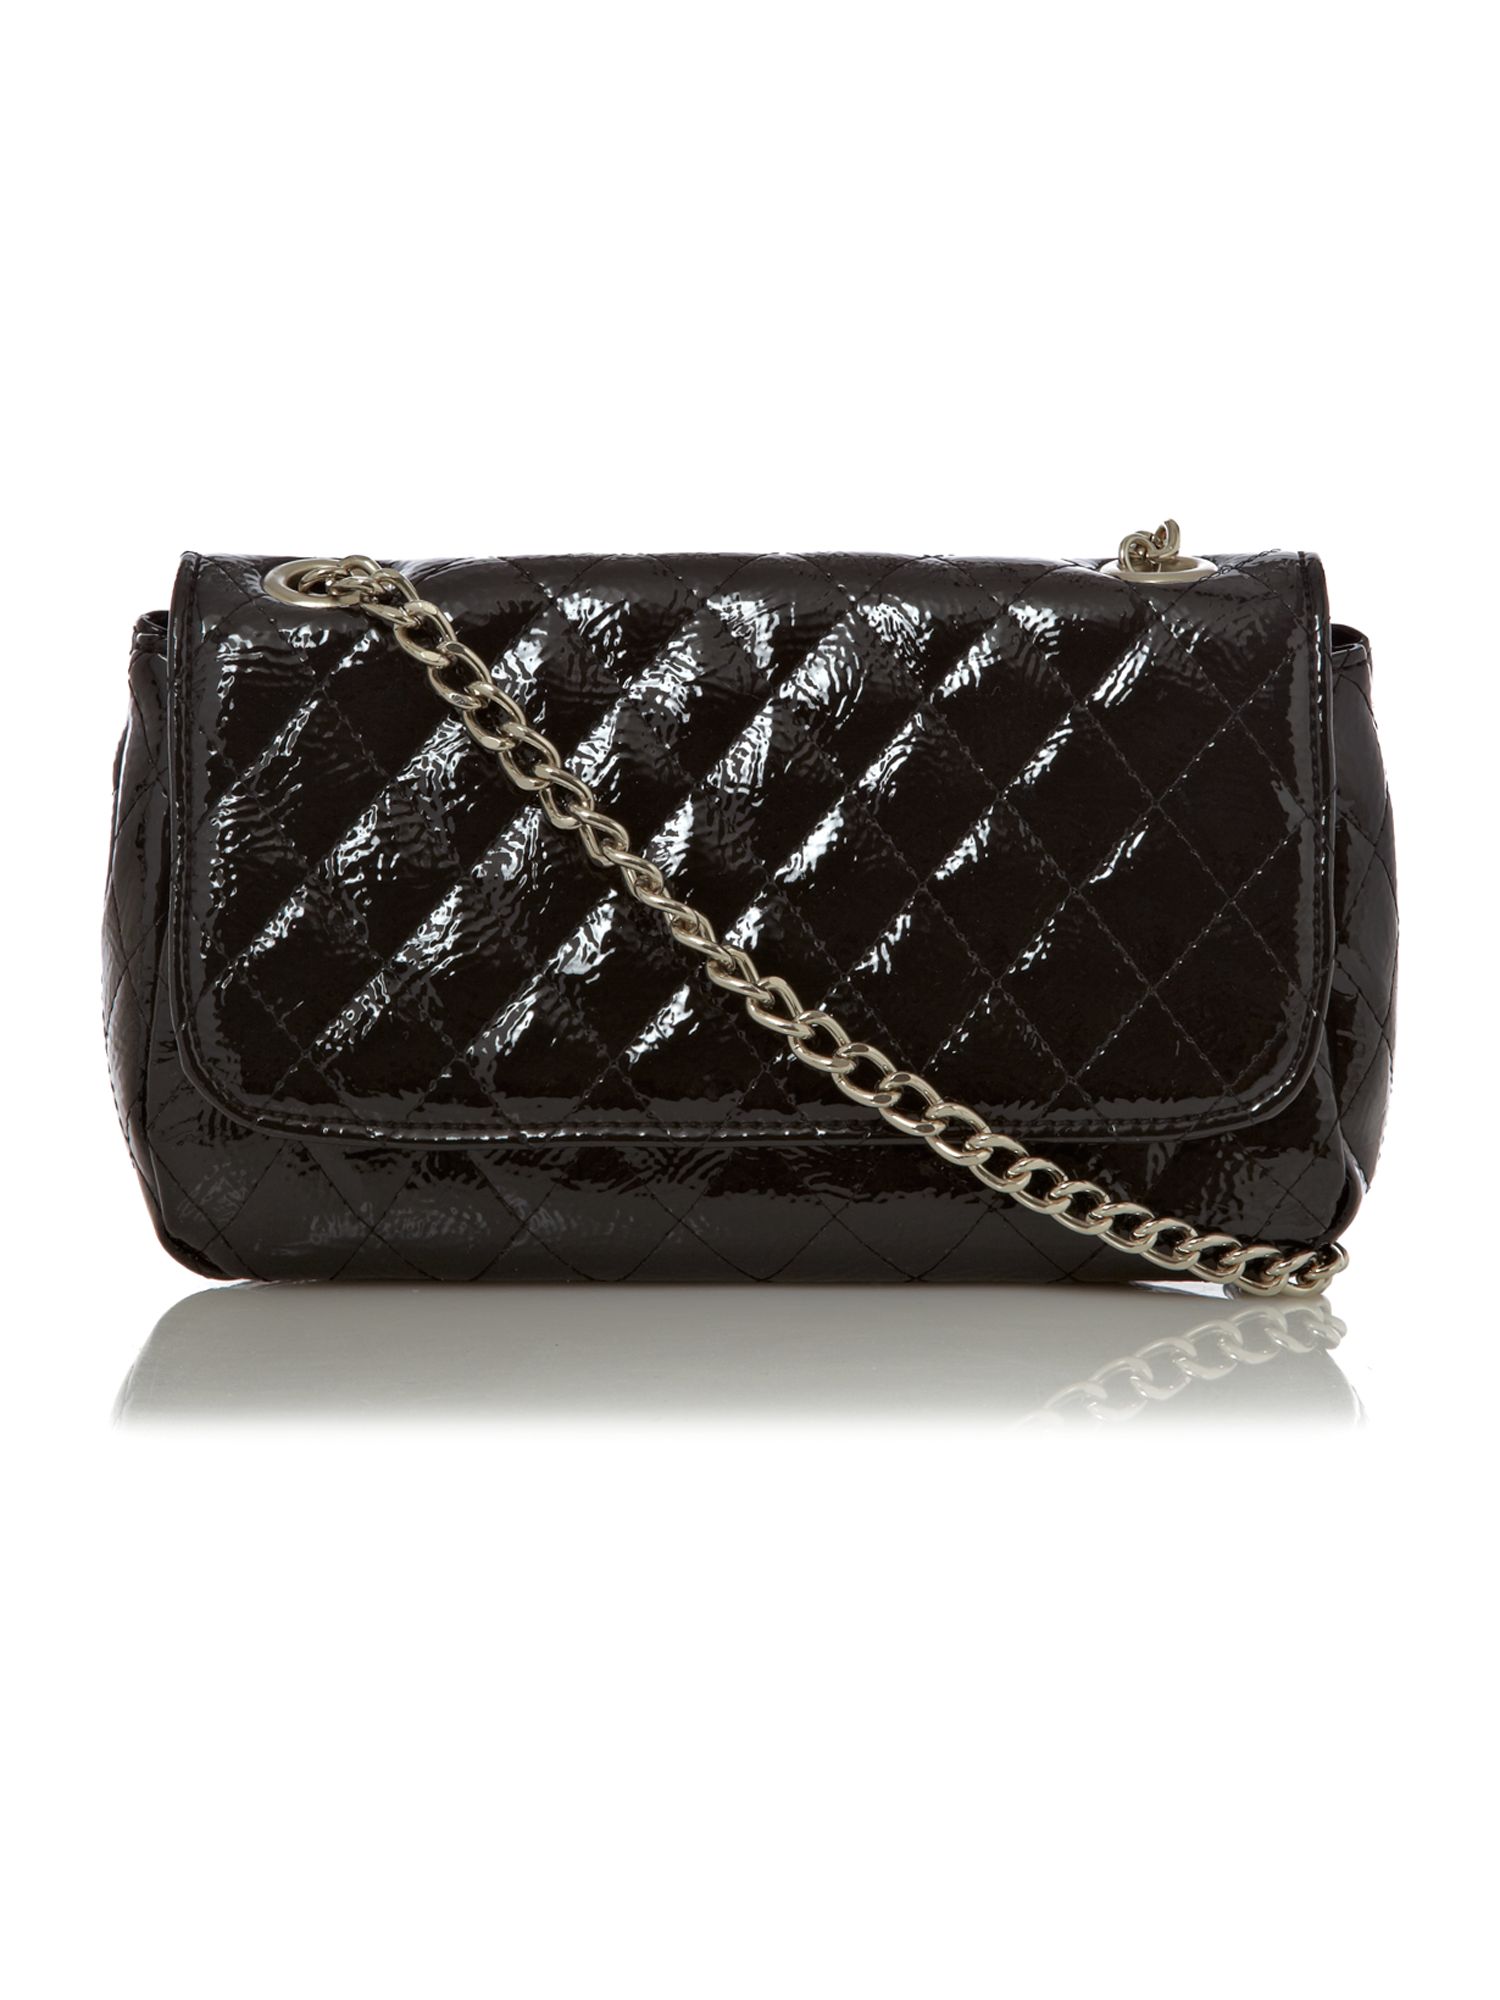 Kenneth Cole Reaction Quilted Chain Crossbody Bag in Black | Lyst